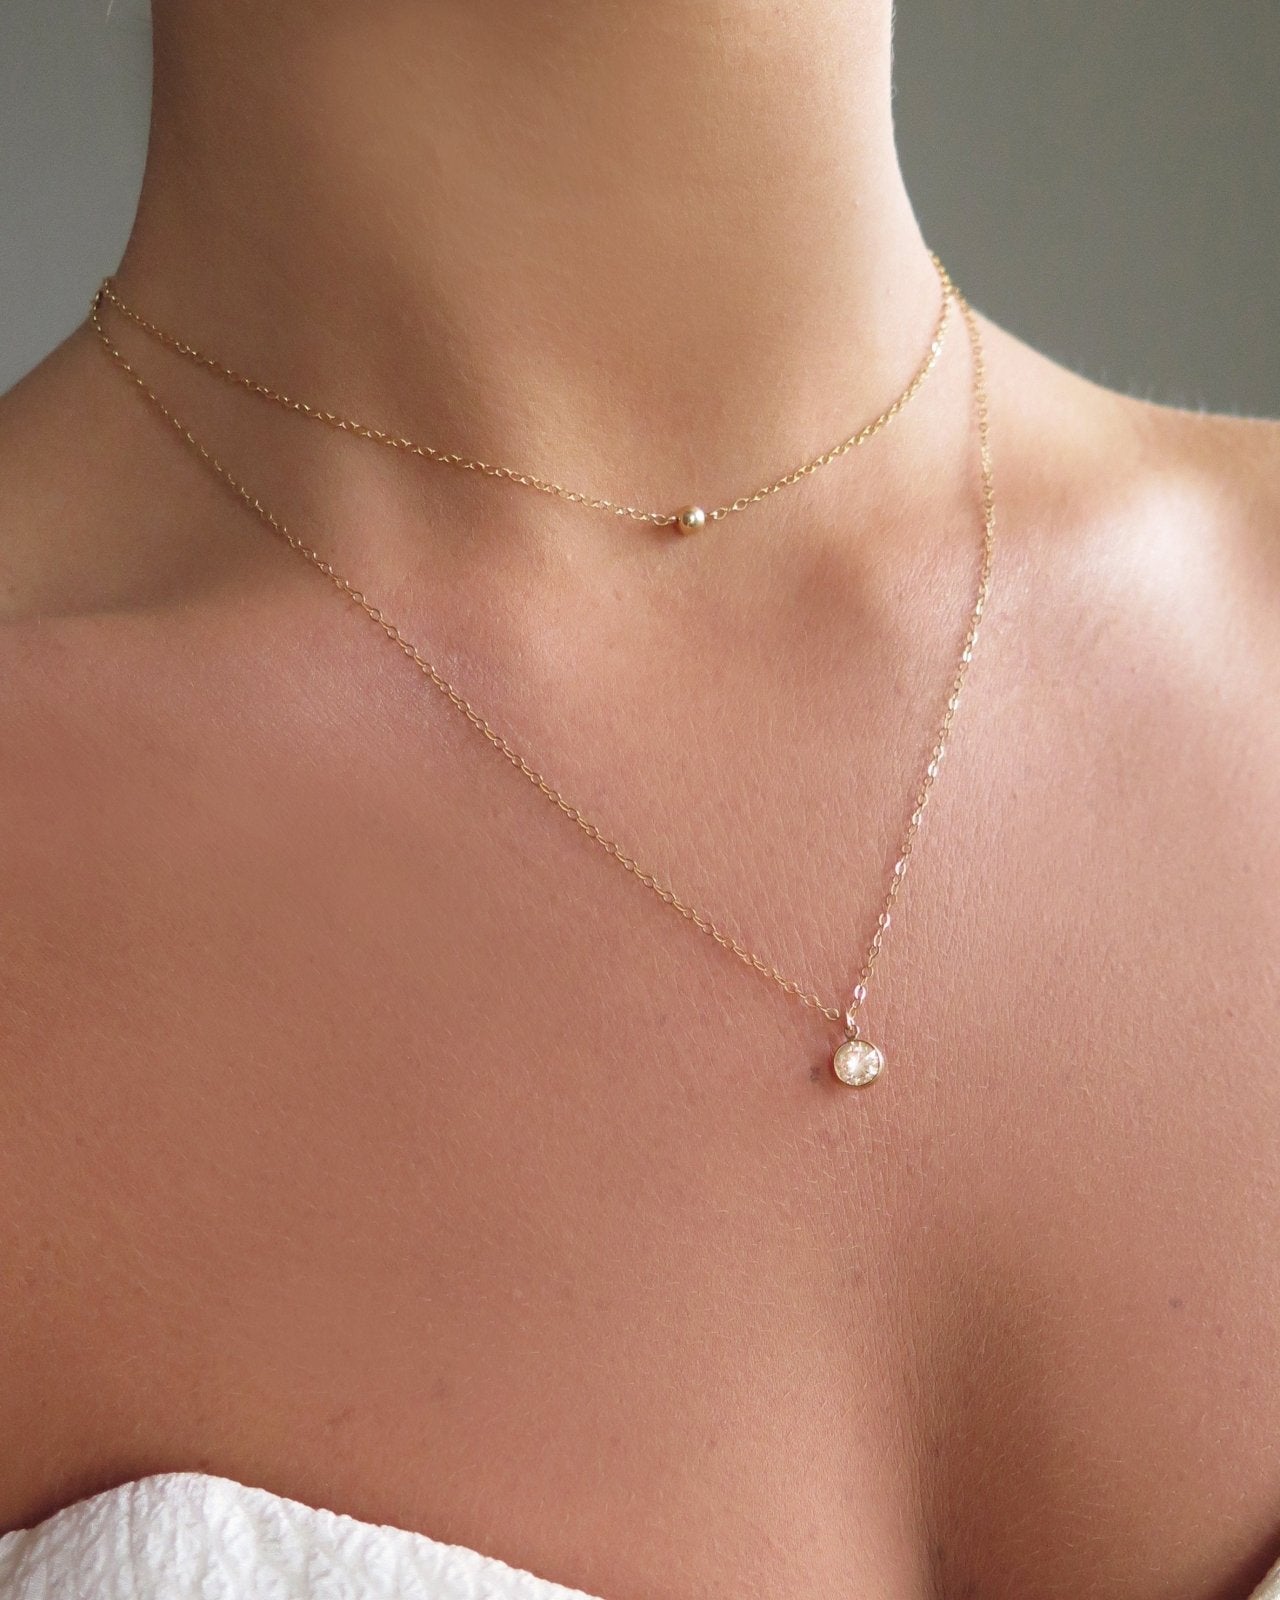 LARGE CZ NECKLACE- 14k Yellow Gold - The Littl - Deluxe Chain - 37cm (choker)